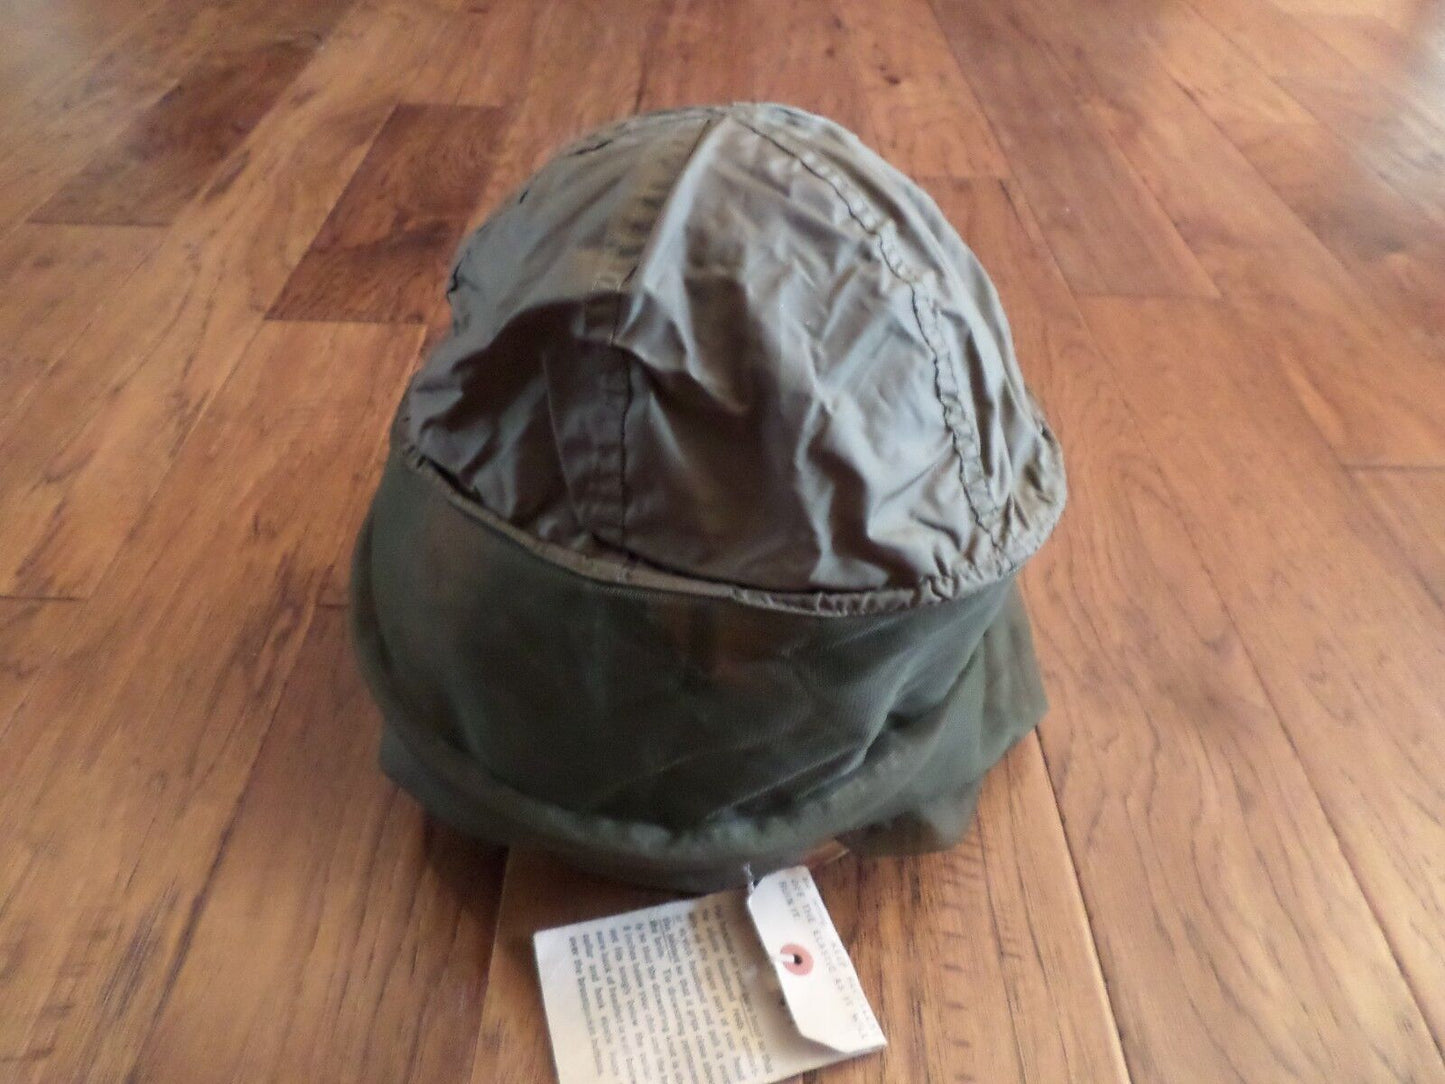 New, U.S. Military Issue Mosquito Insect Net